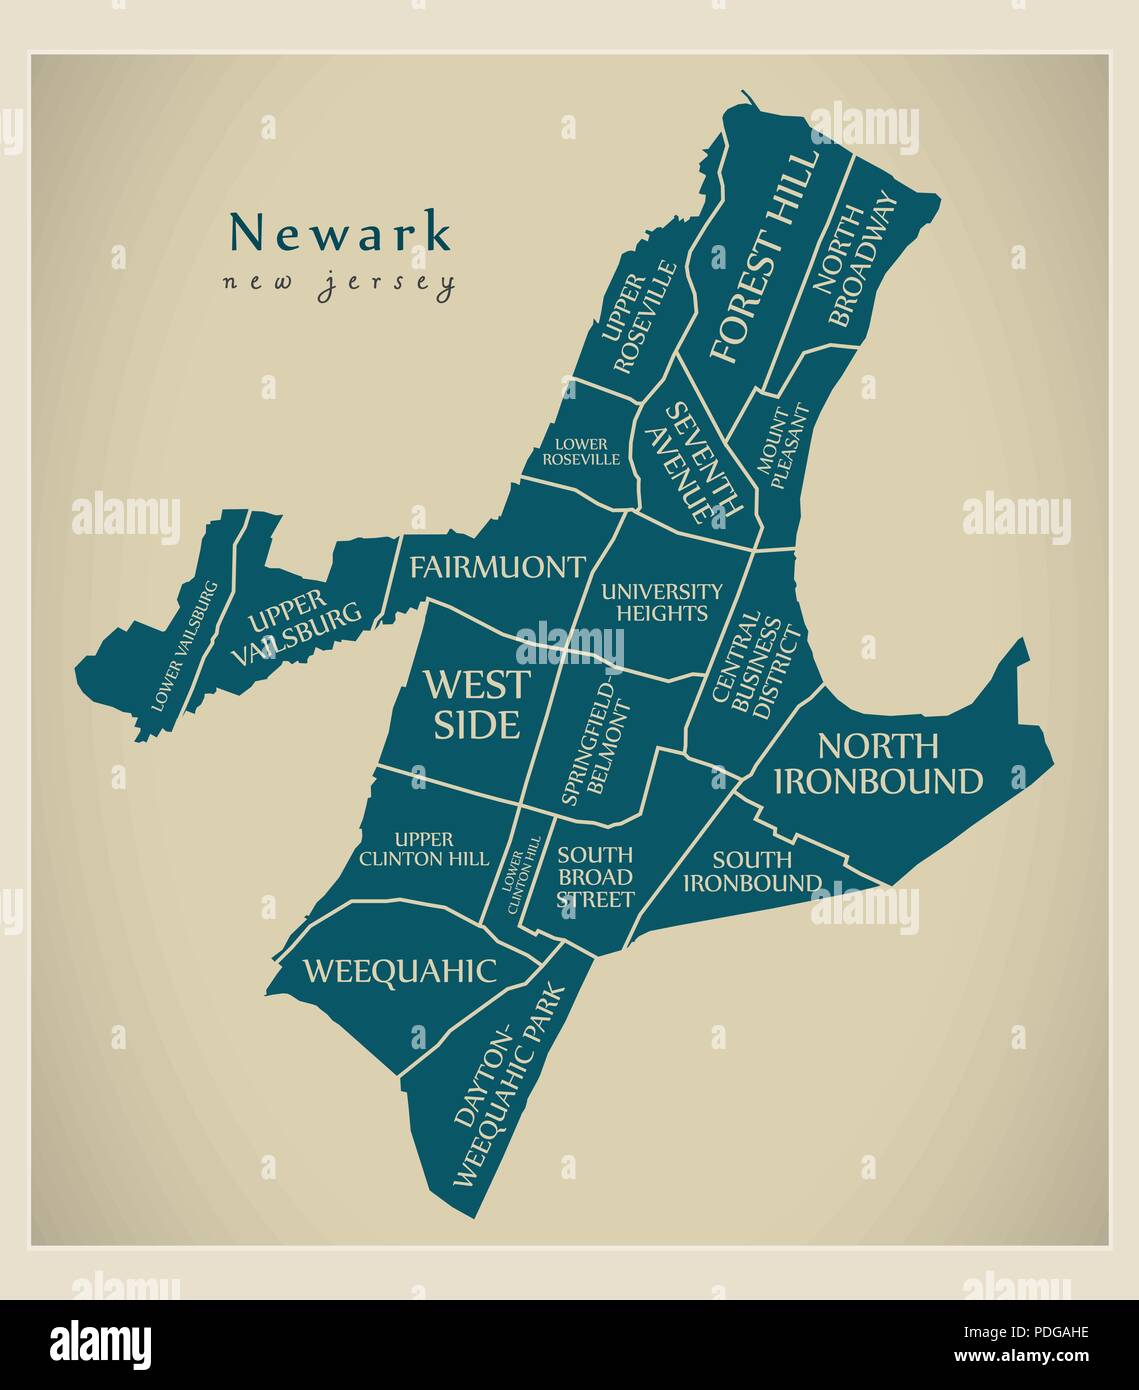 Map Of Newark Nj Neighborhoods Images and Photos finder